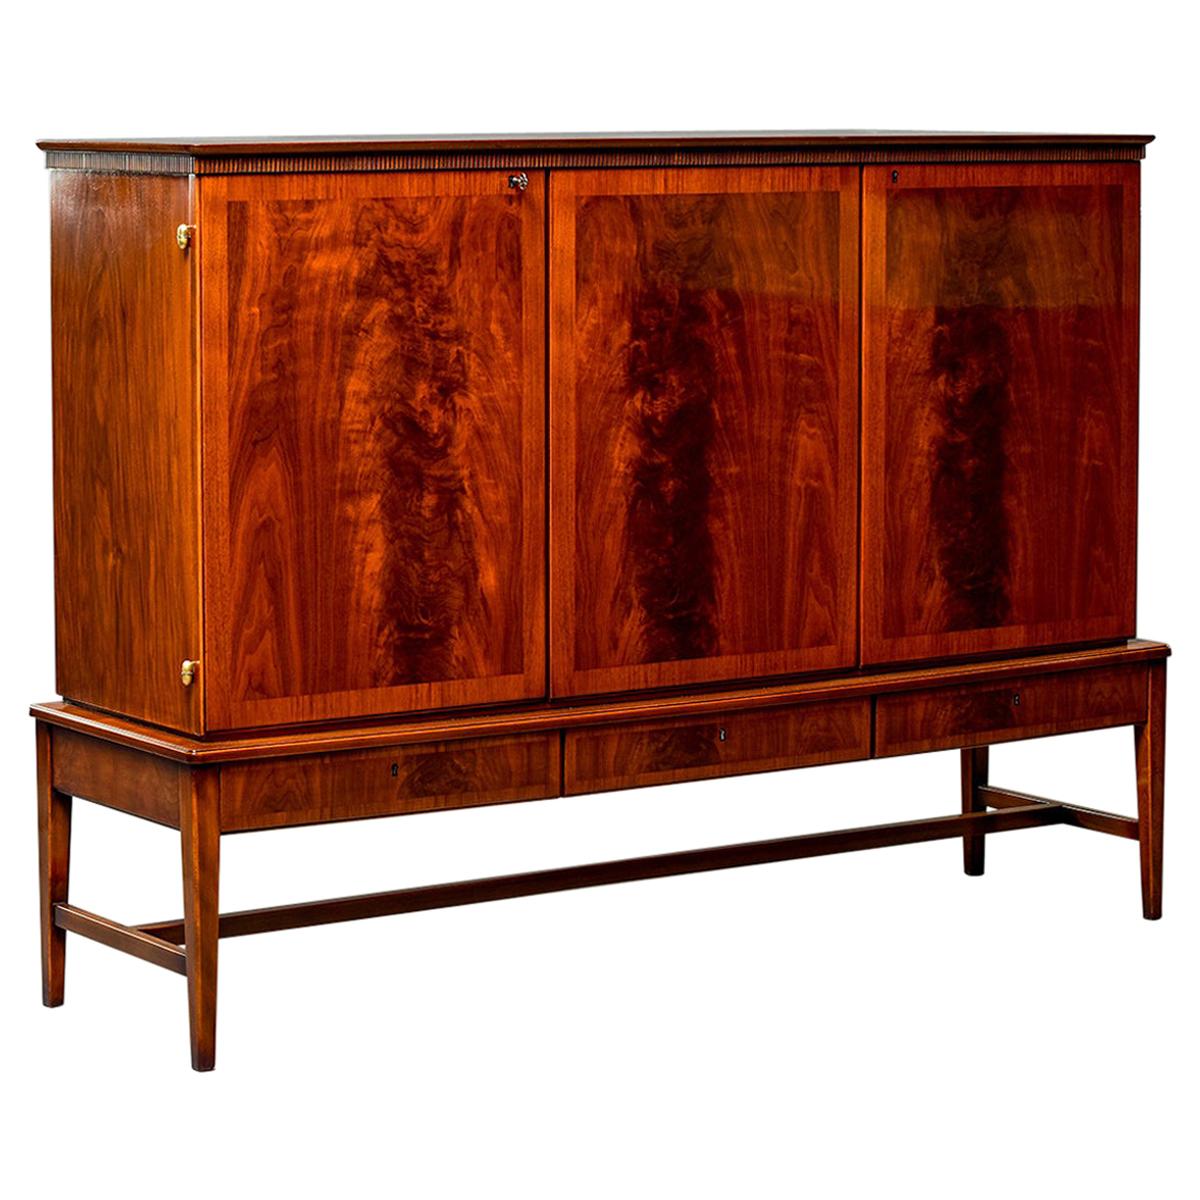 Midcentury Swedish Tall Cabinet-on-Stand Buffet or Credenza